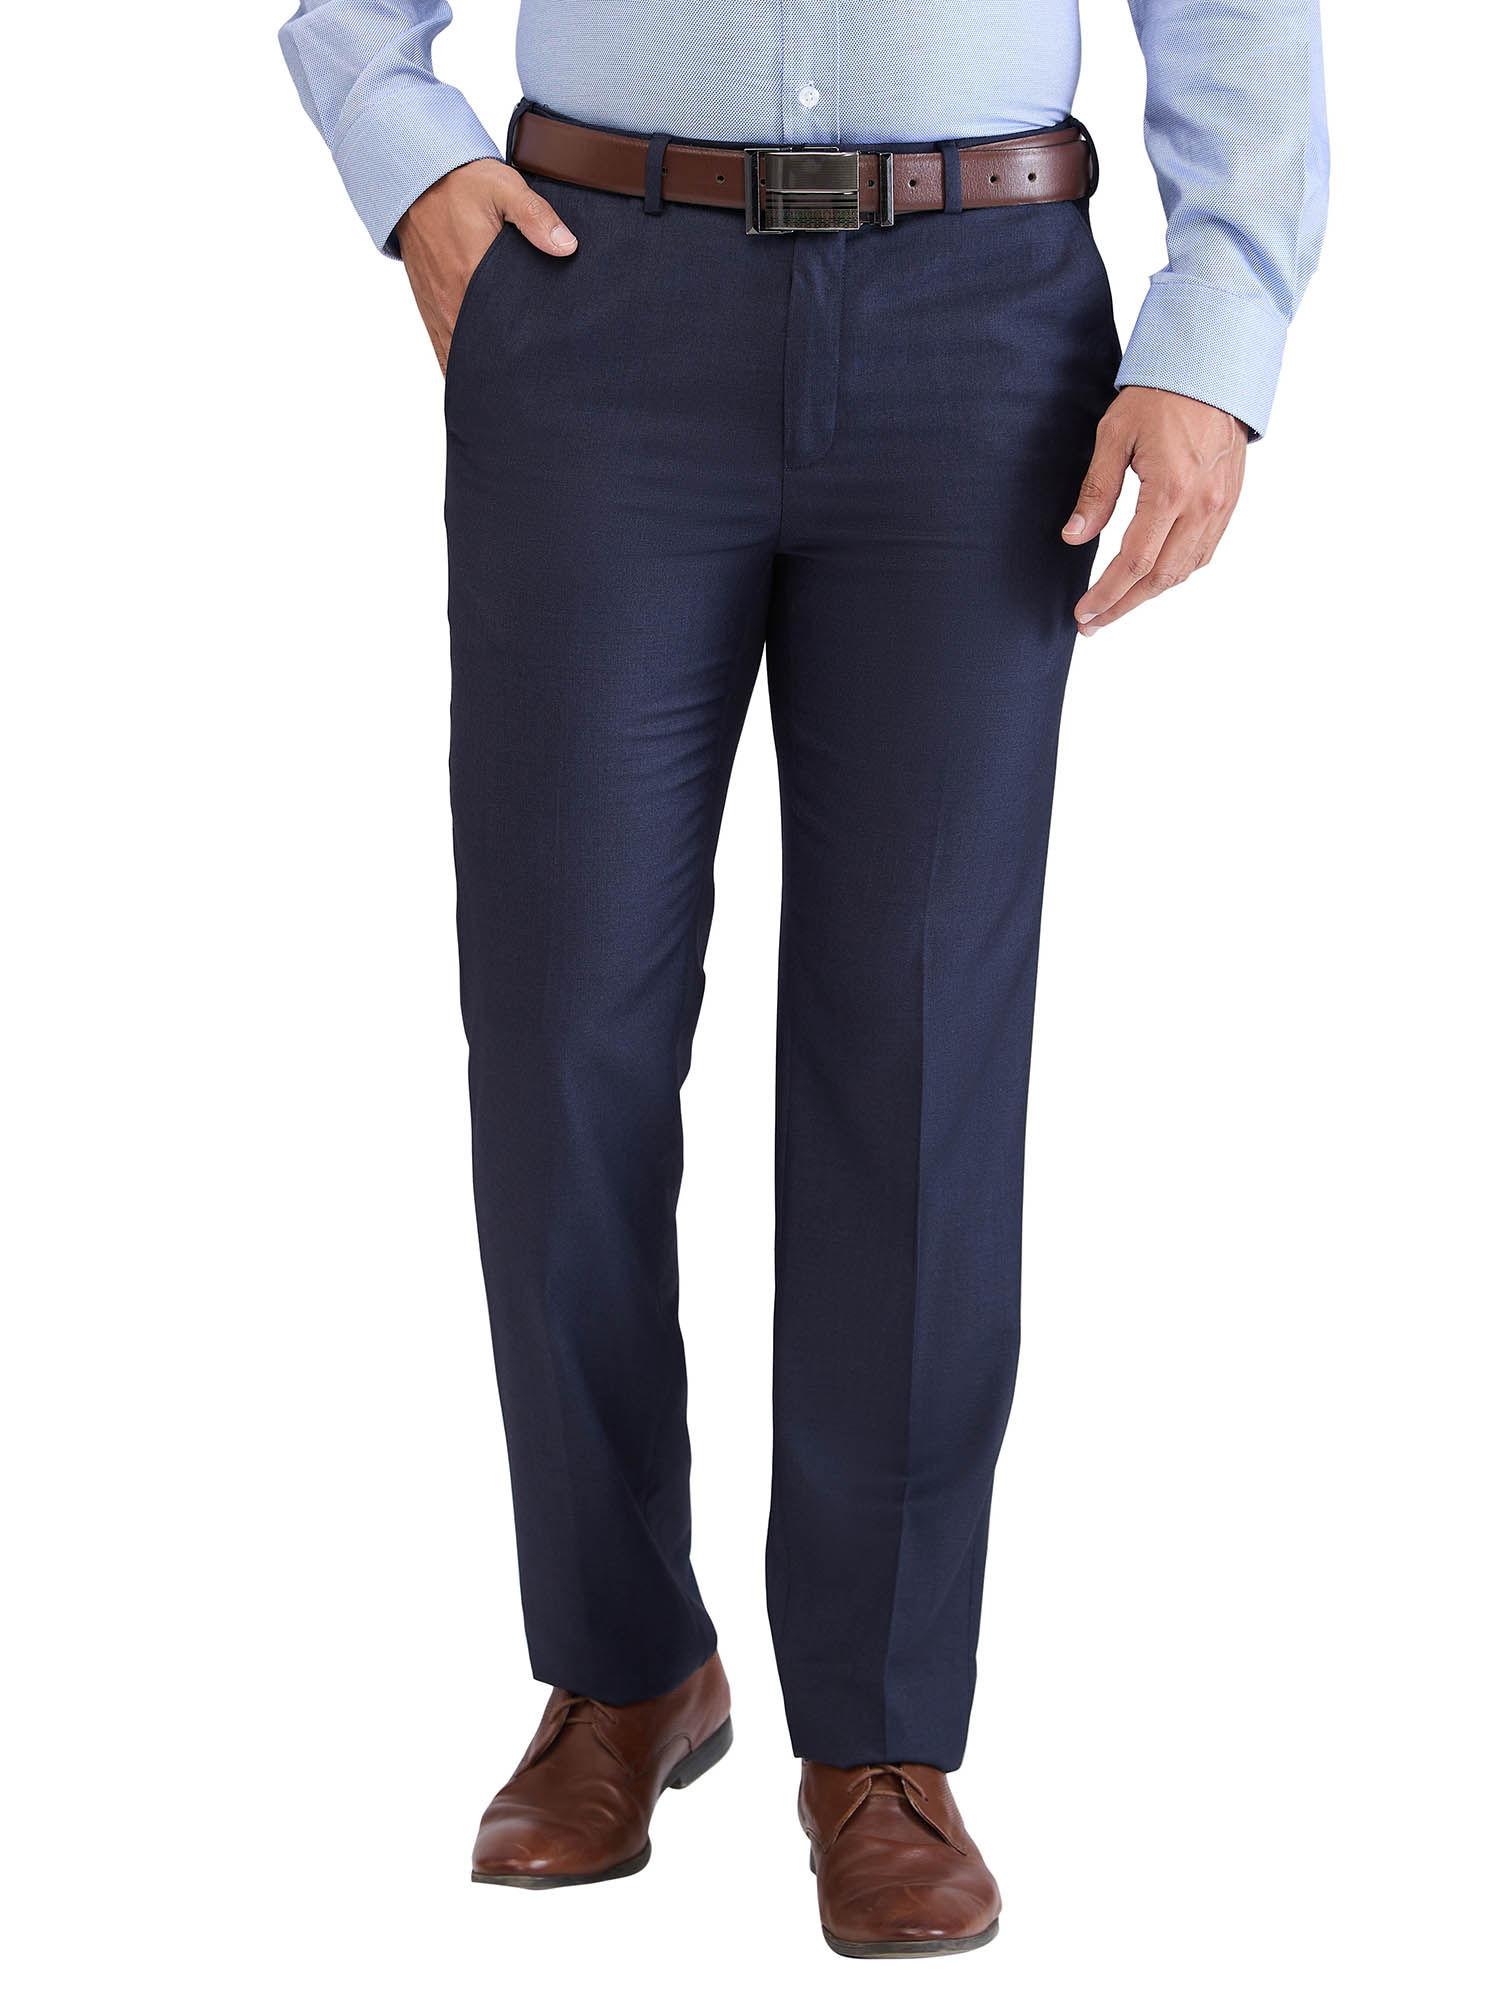 contemporary fit solid dark blue formal trouser